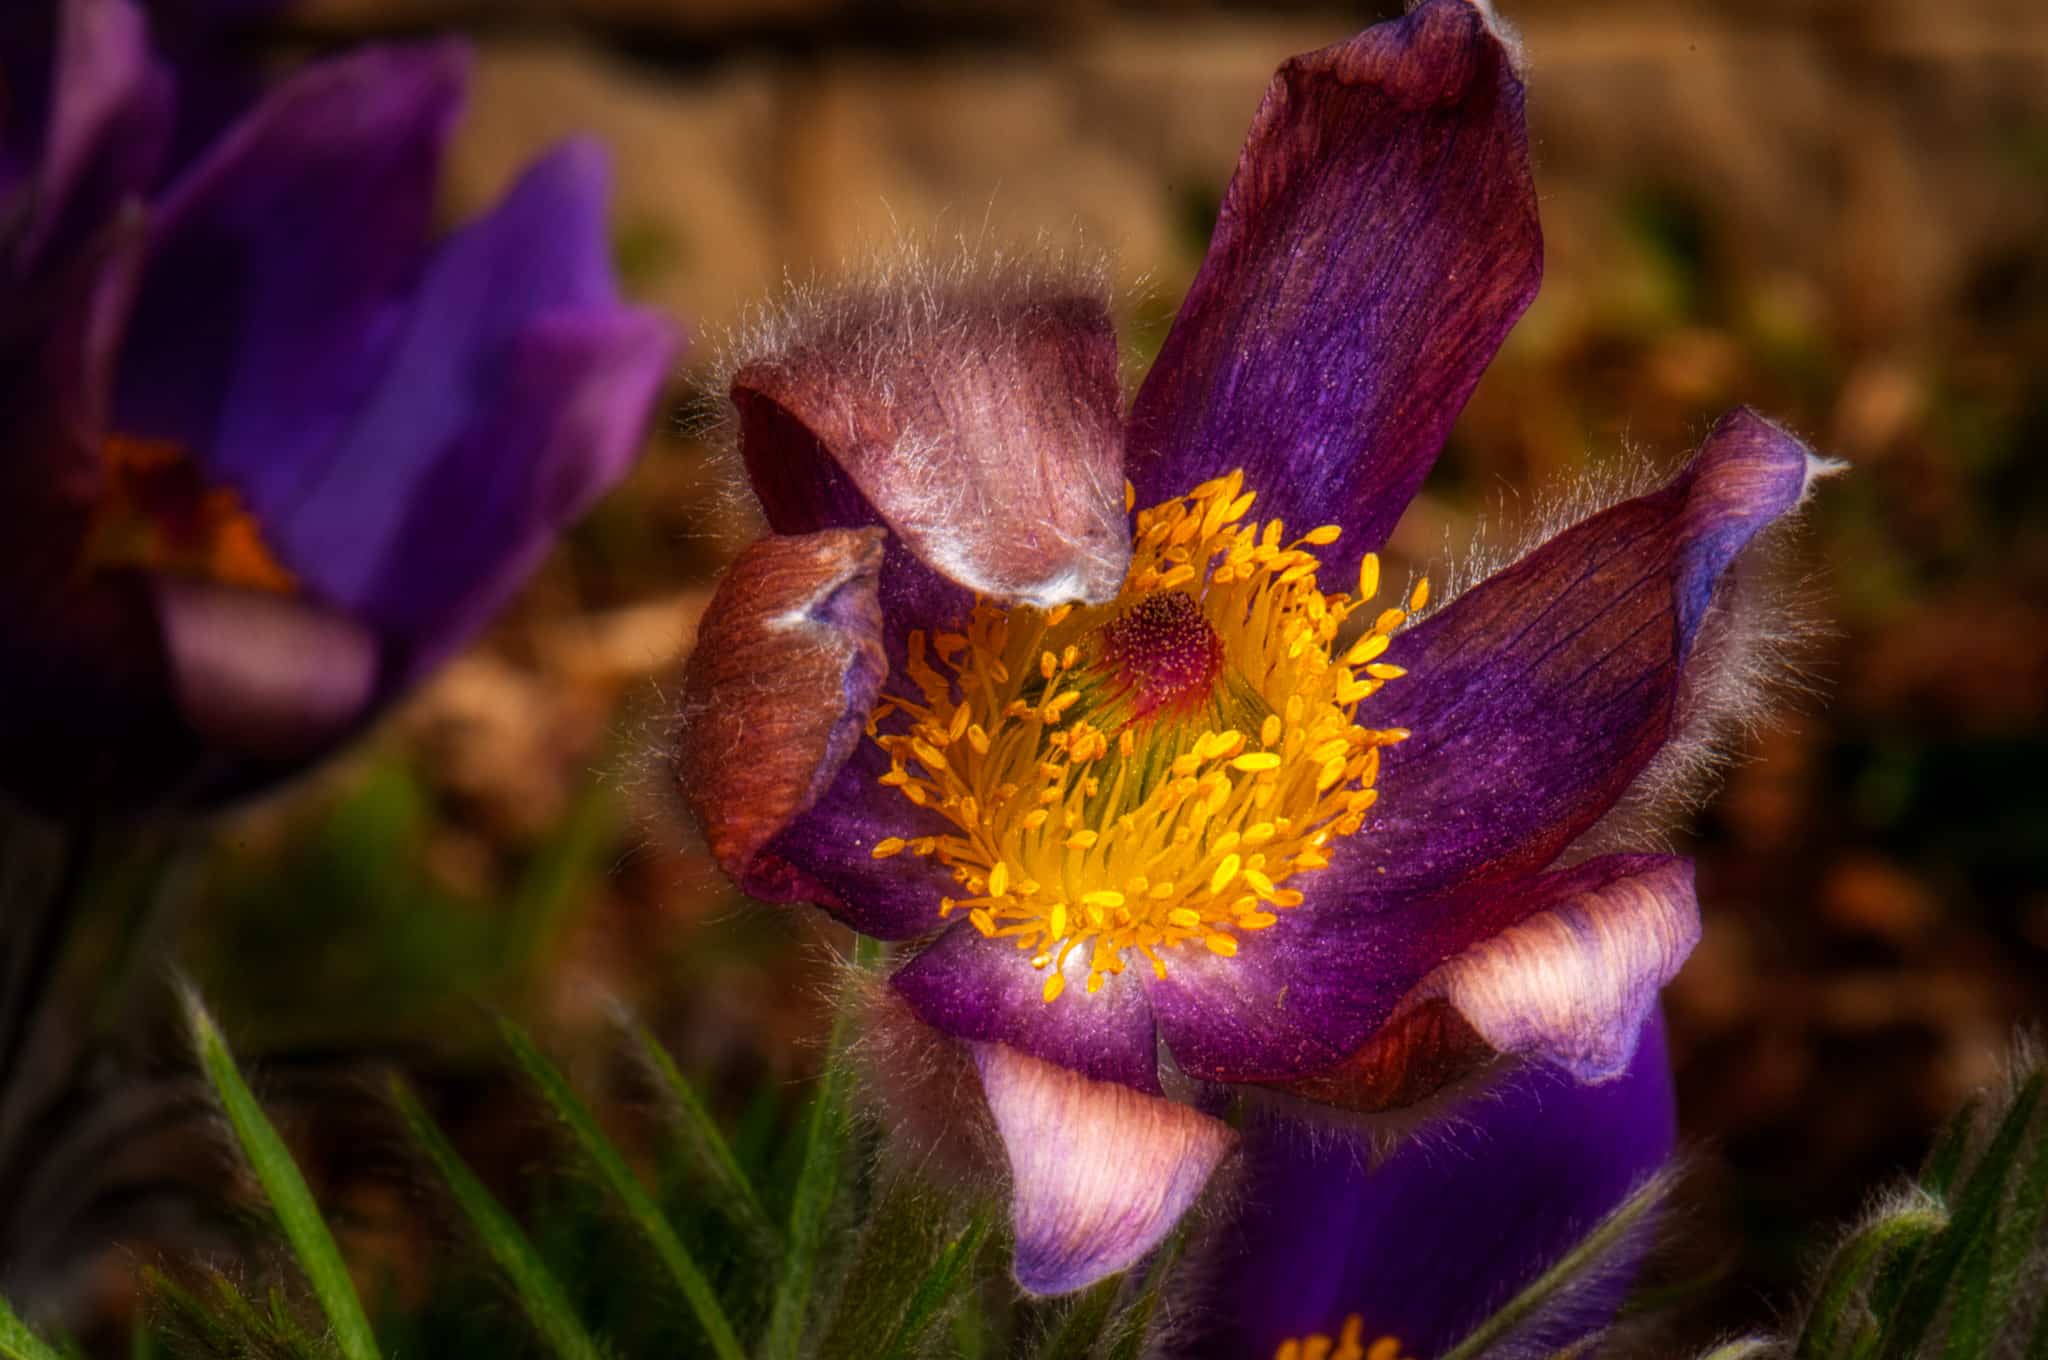 This hairy Pasque Flower is the first up in our garden in the spring.